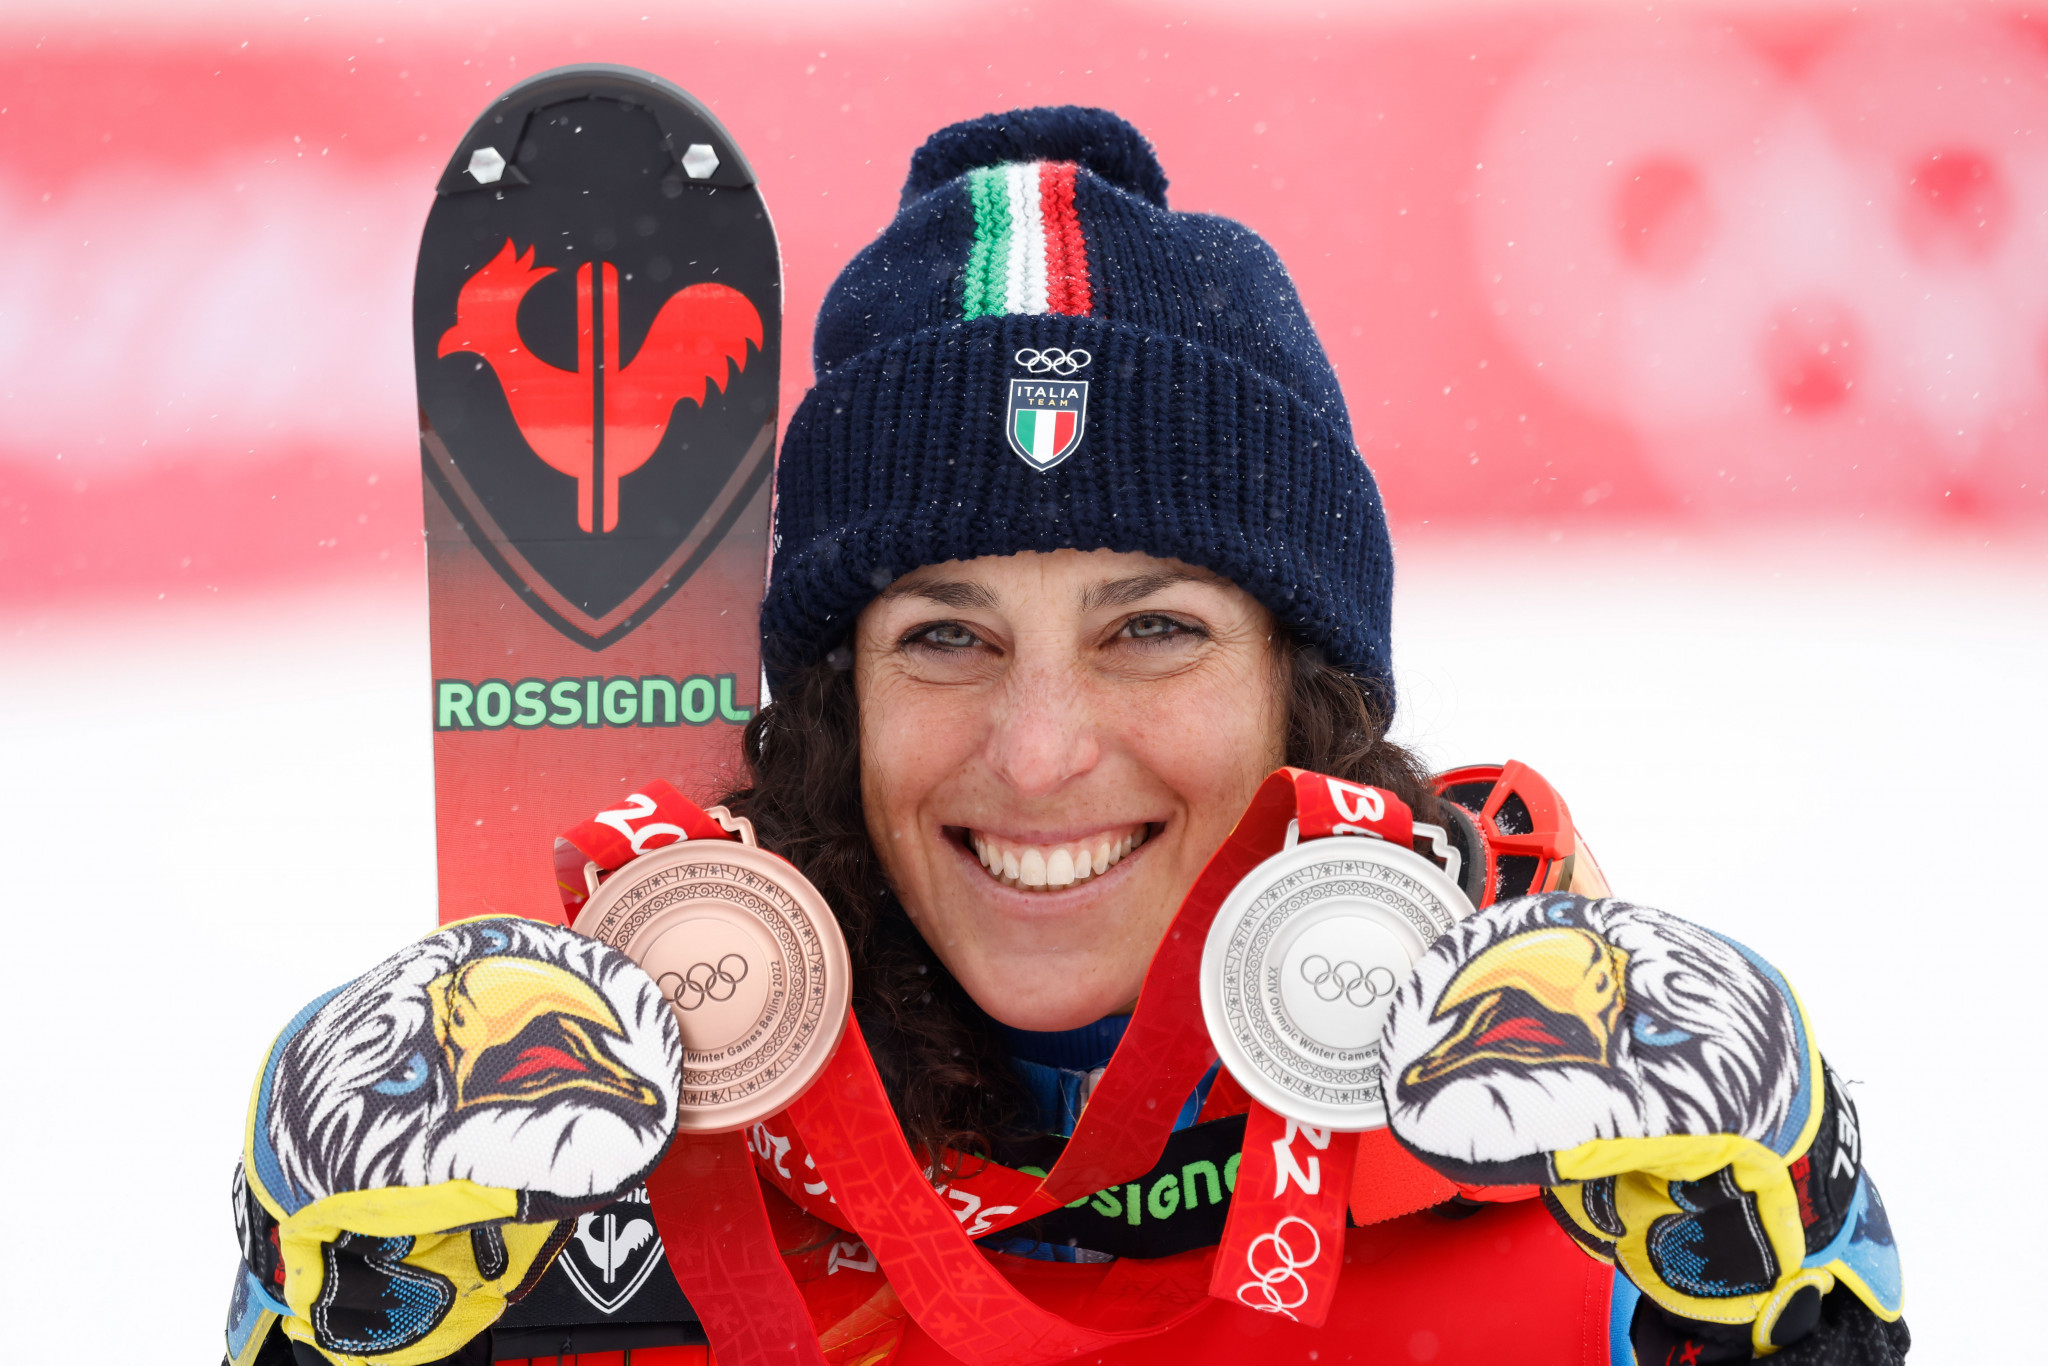 Federica Brignone won two medals at this year's Winter Olympics ©Getty Images